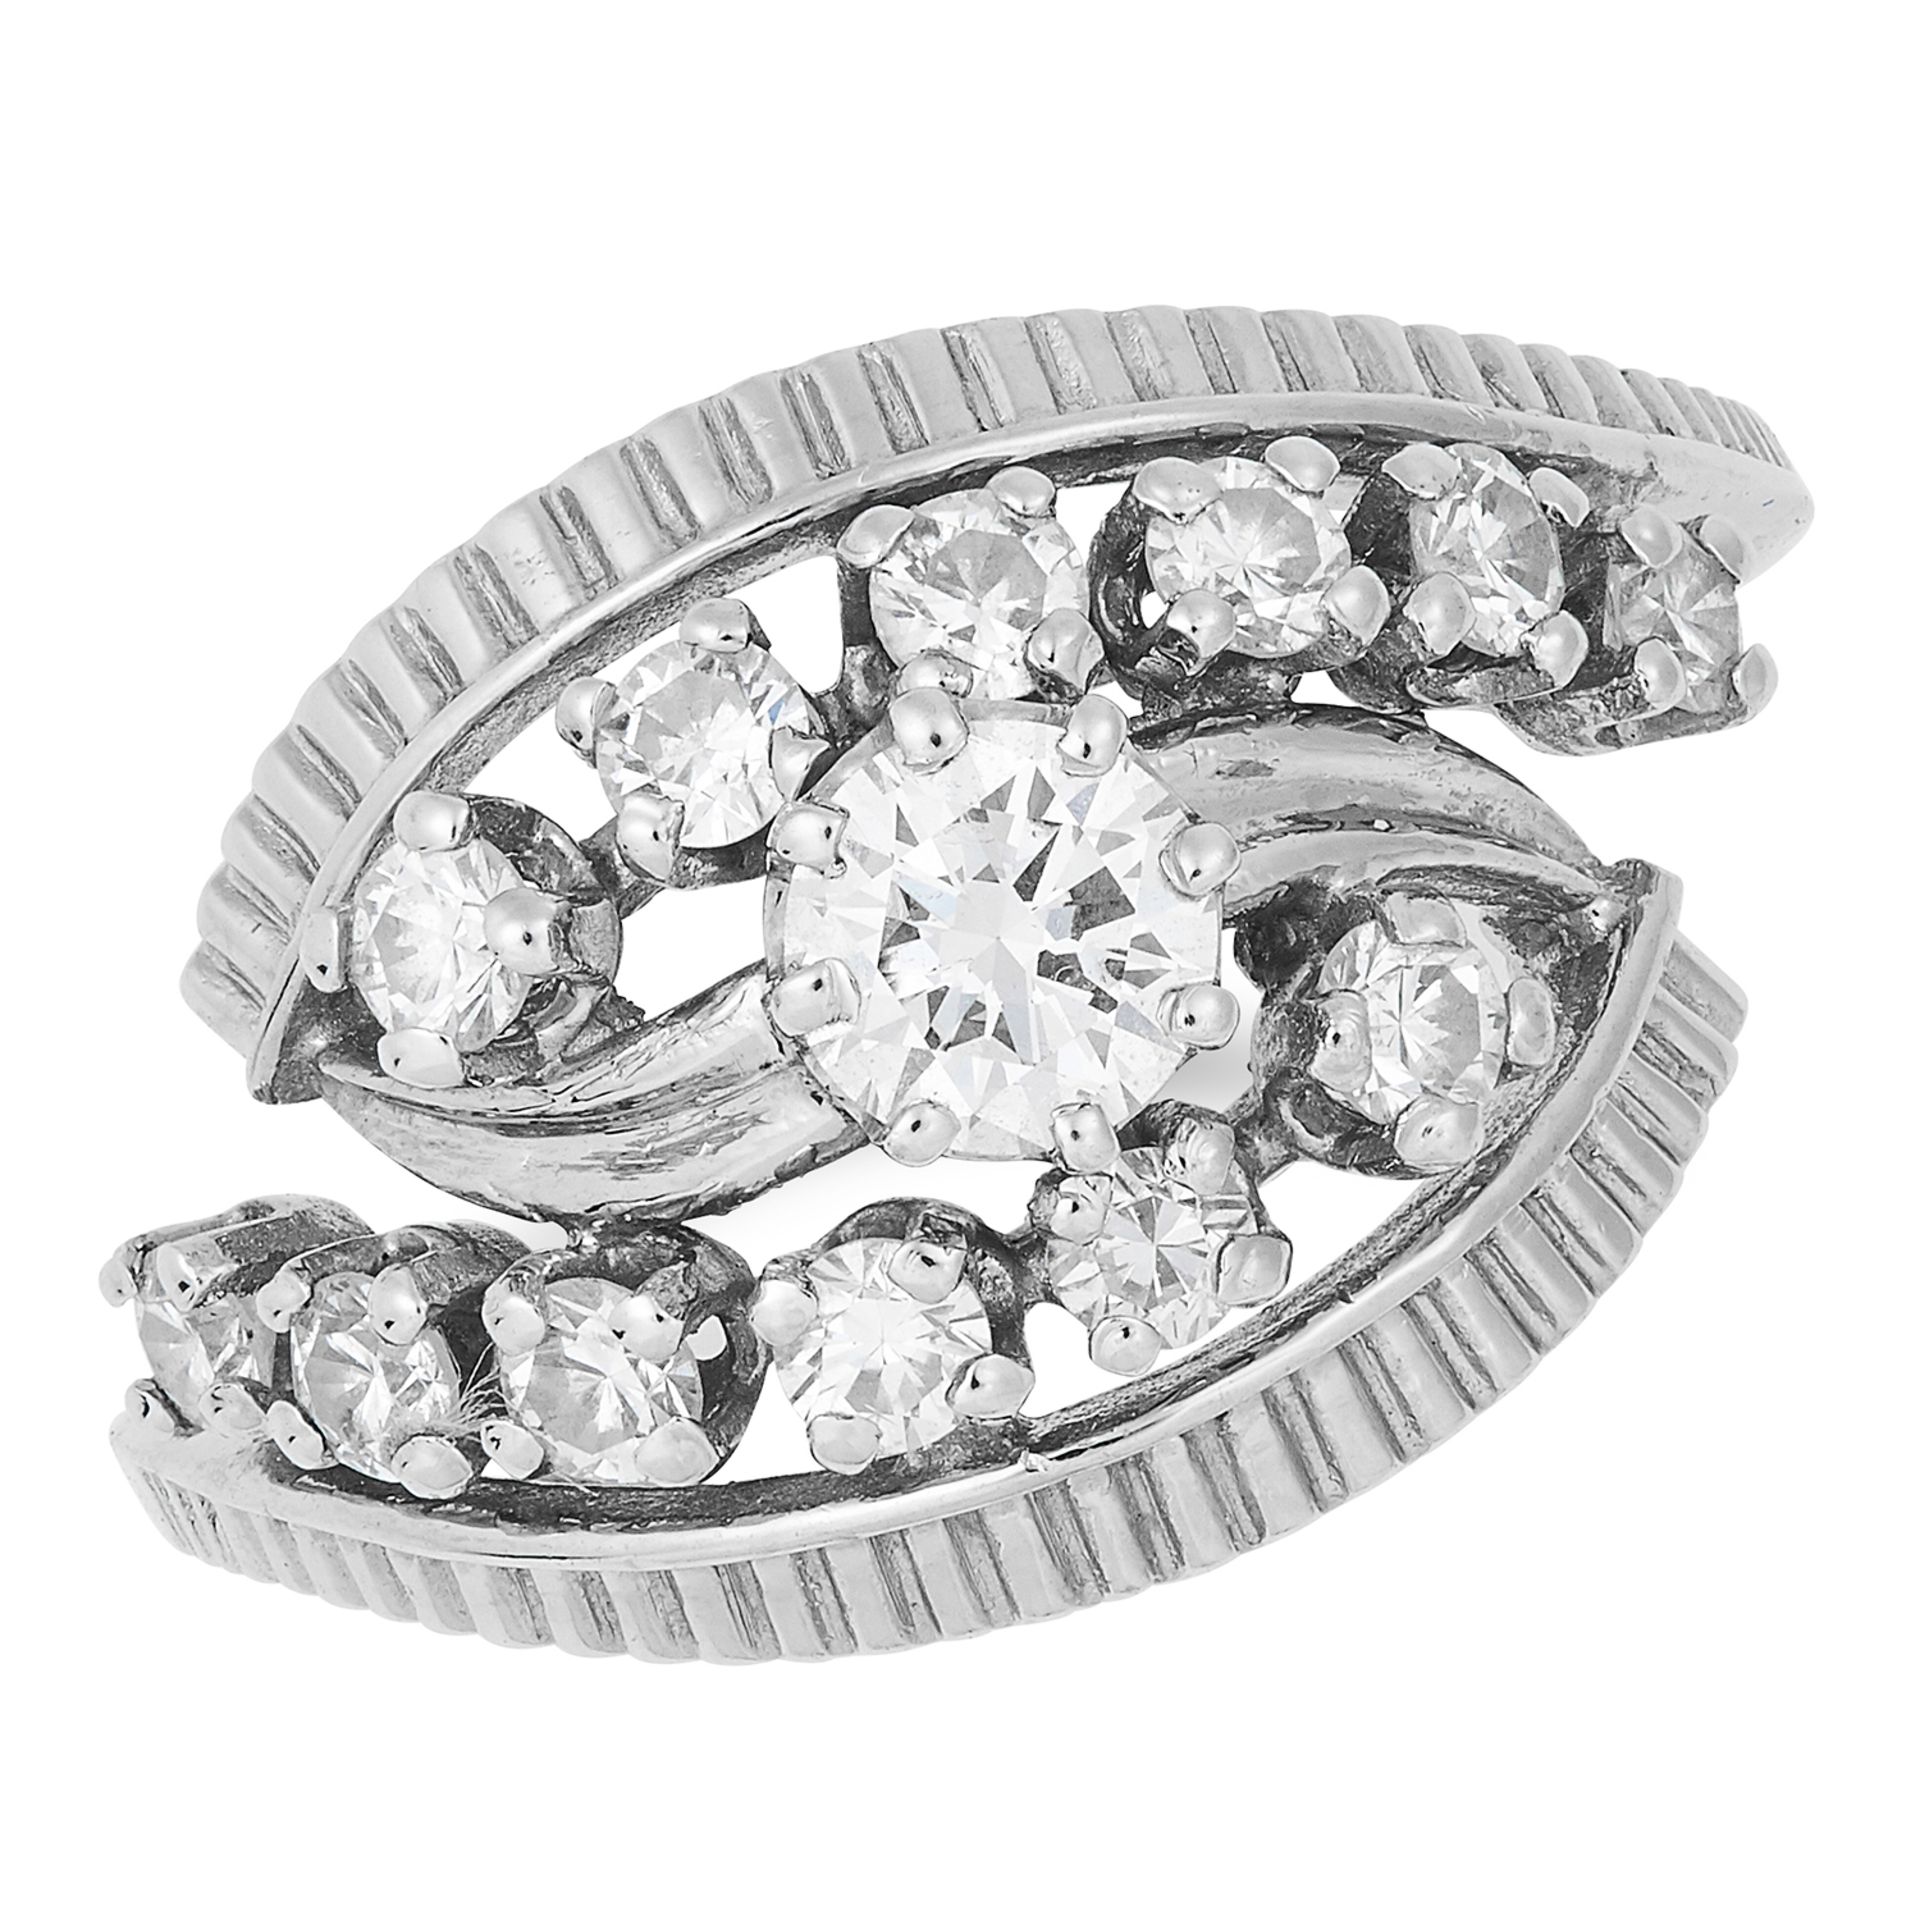 DIAMOND BOMBE RING set with round cut diamonds totalling approximately 1.0 carats, size N / 6.5, 4.